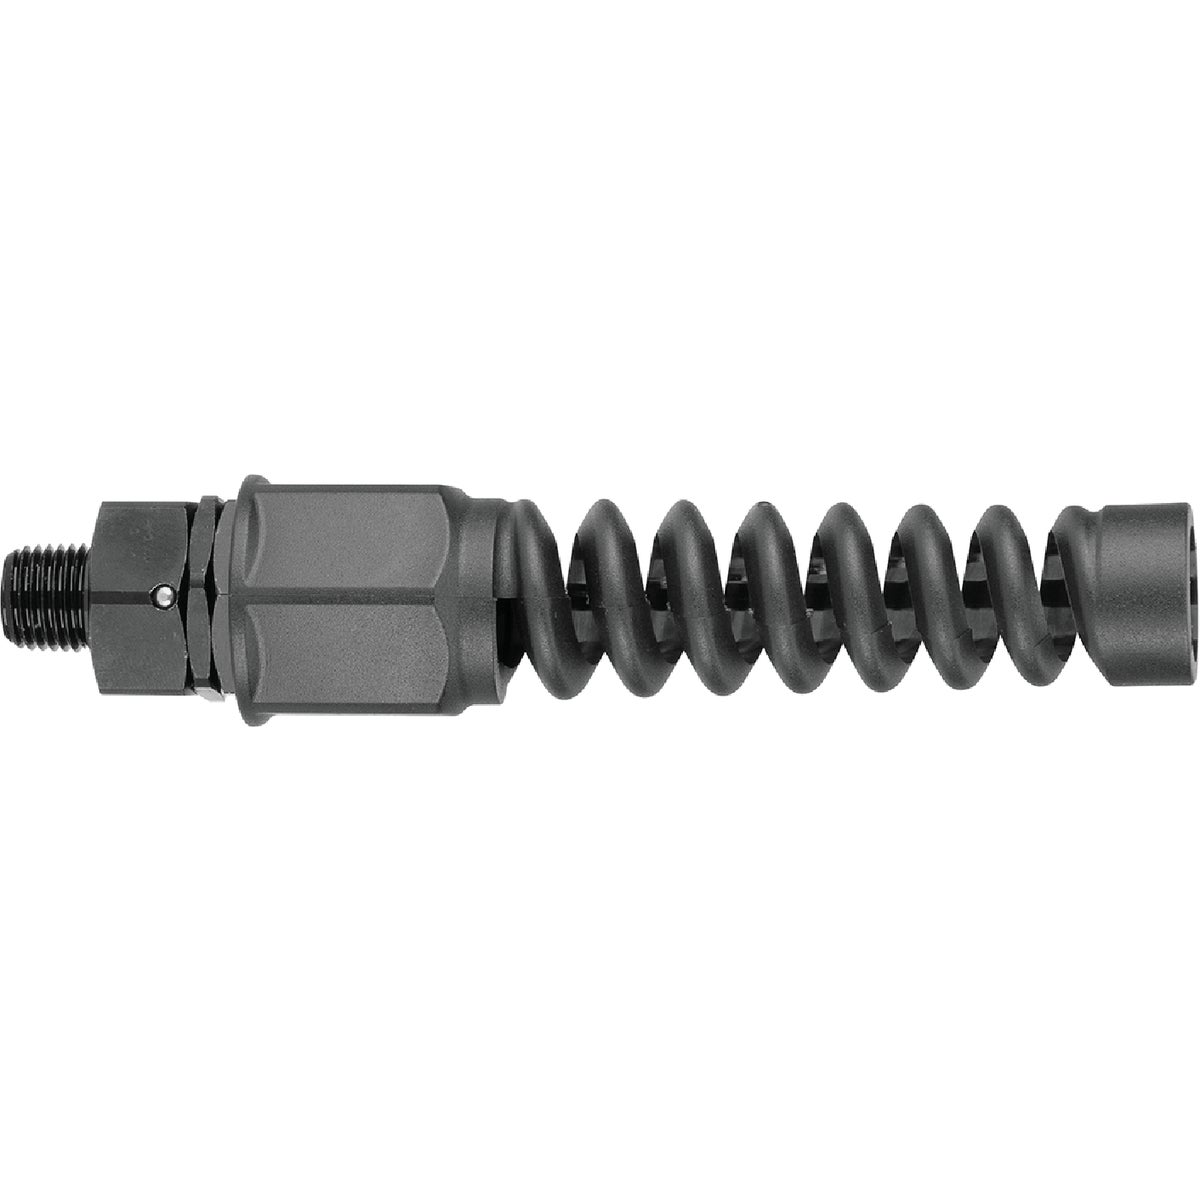 Item 570535, Flexzilla Pro Reusable Fittings allow you to quickly assemble a custom 